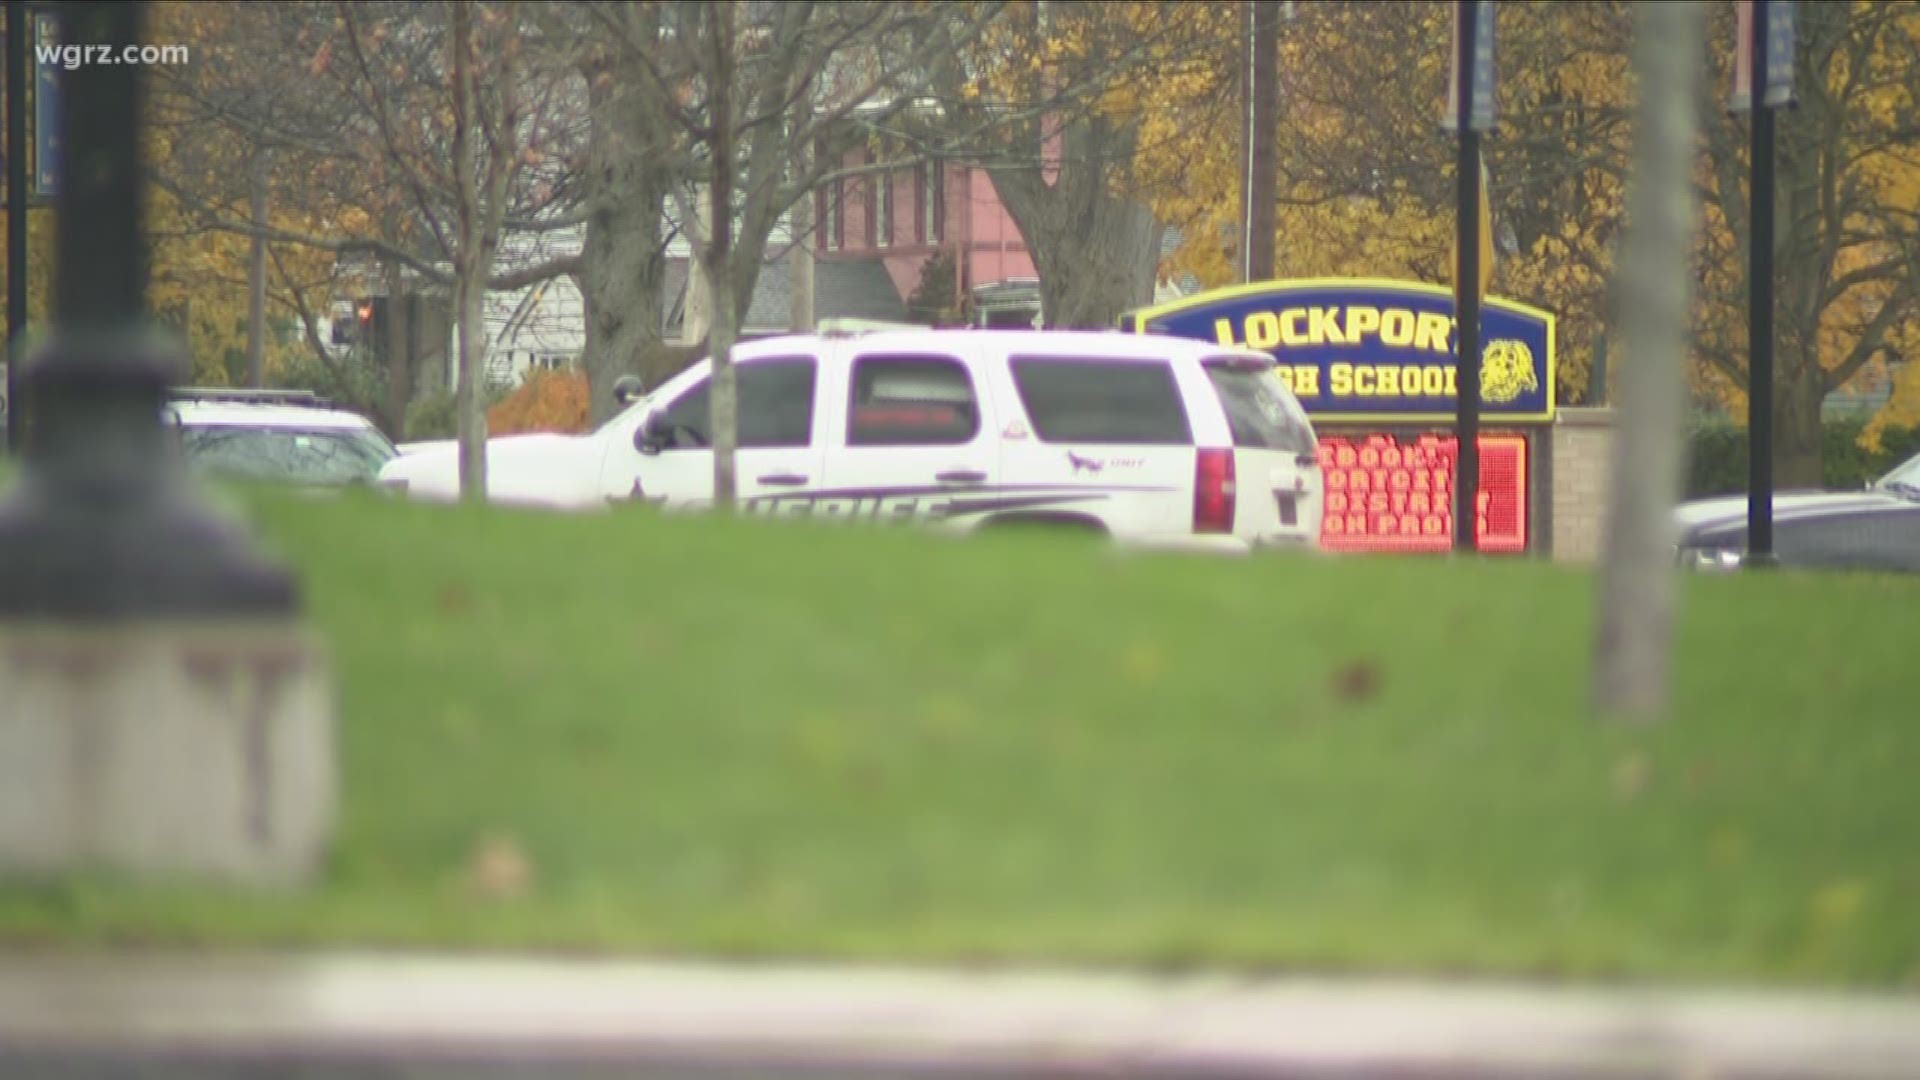 Lockport high school to be opened tomorrow after evacuation